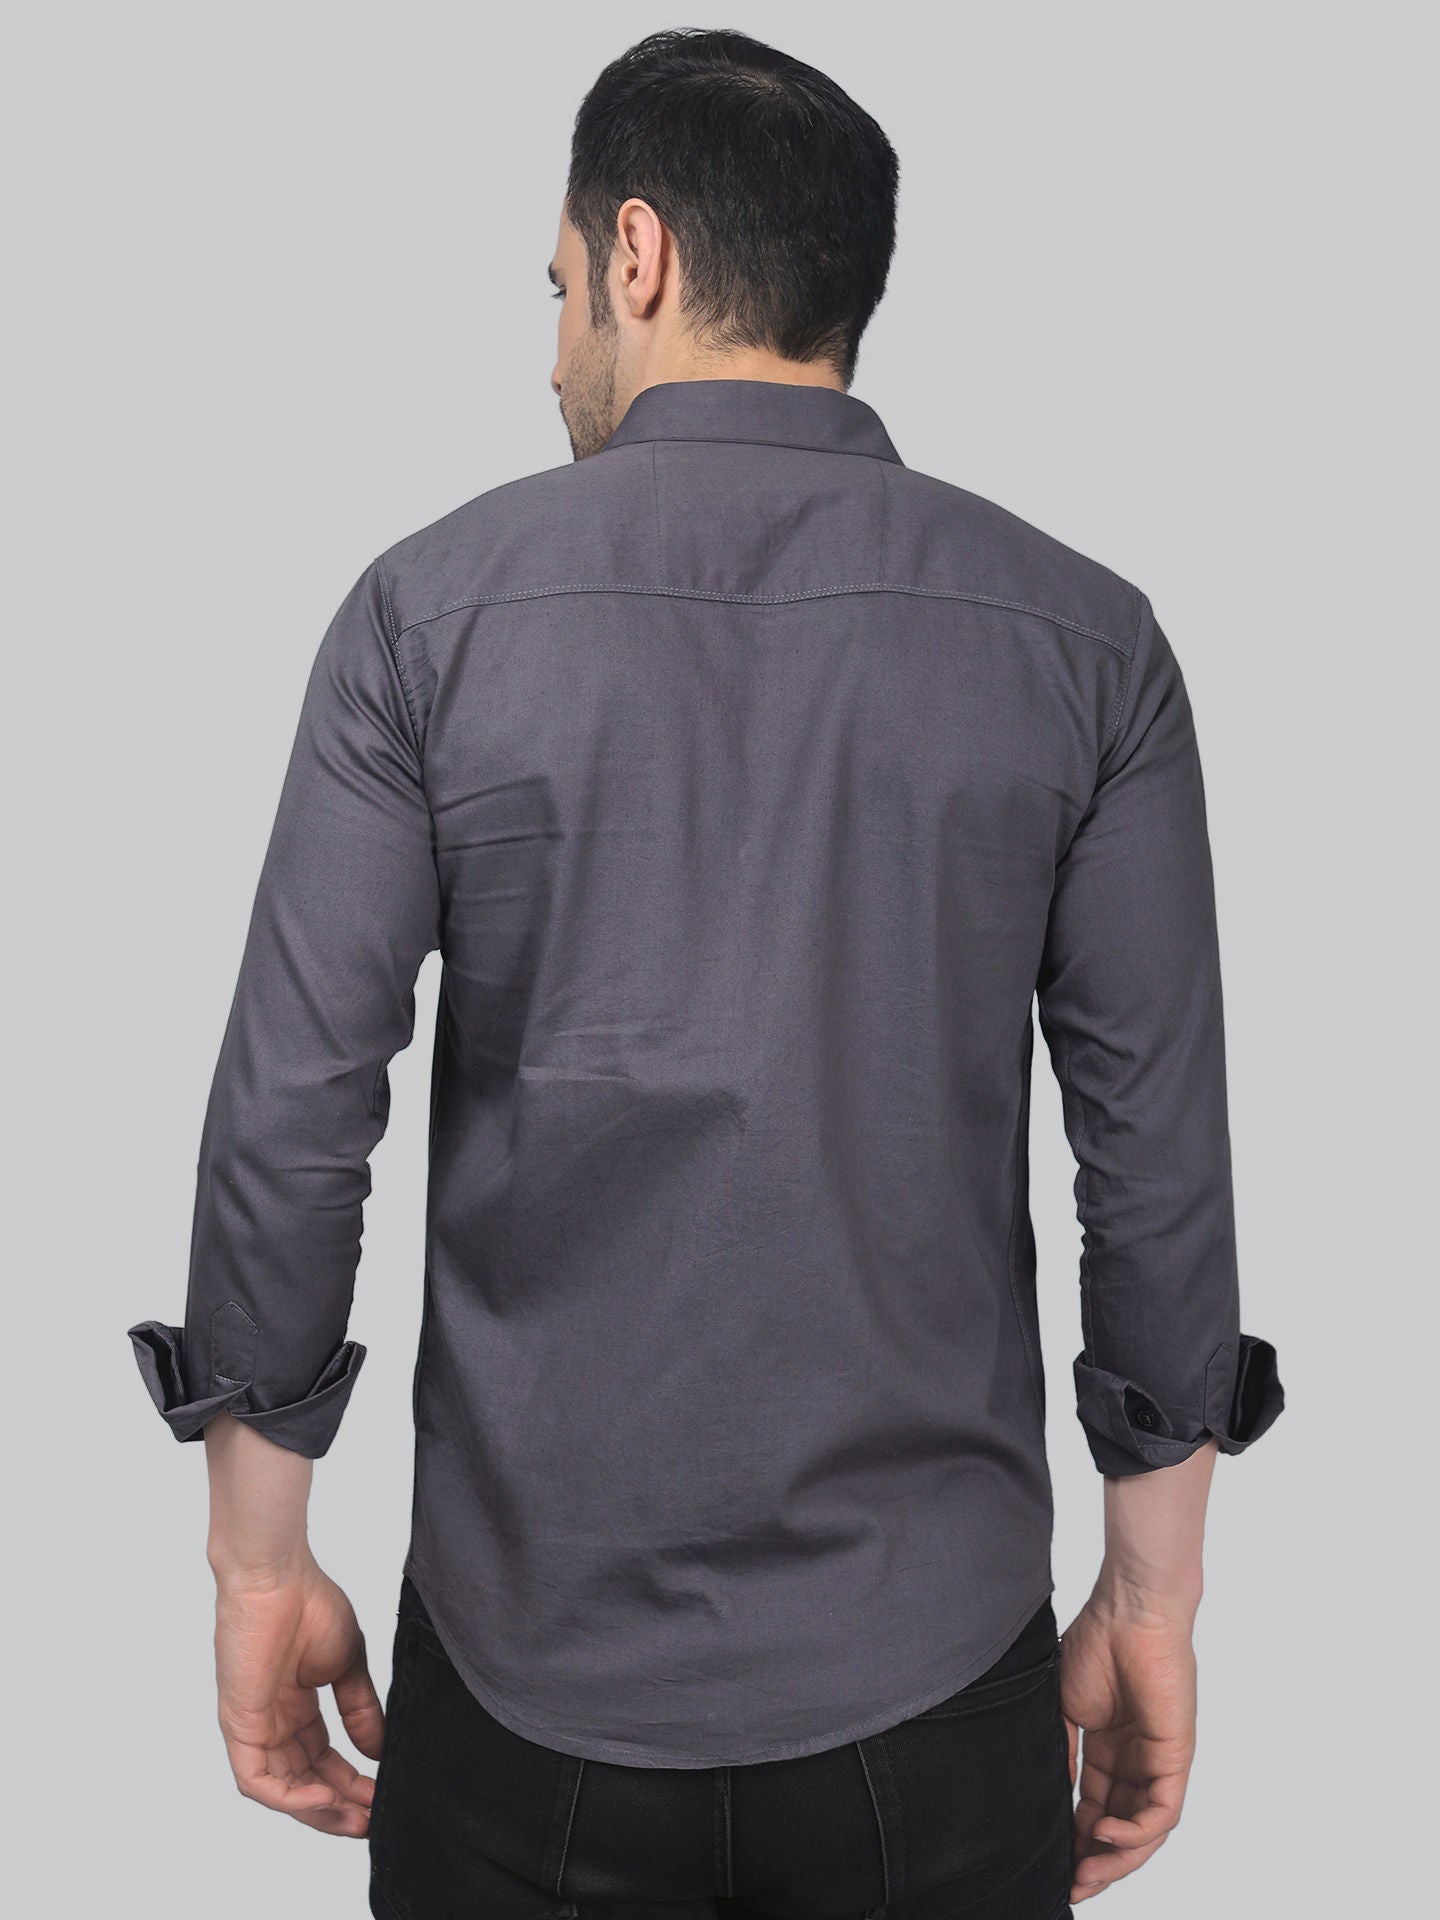 Whimsical TryBuy Premium Graphite Casual/Formal Shirt for Men - TryBuy® USA🇺🇸